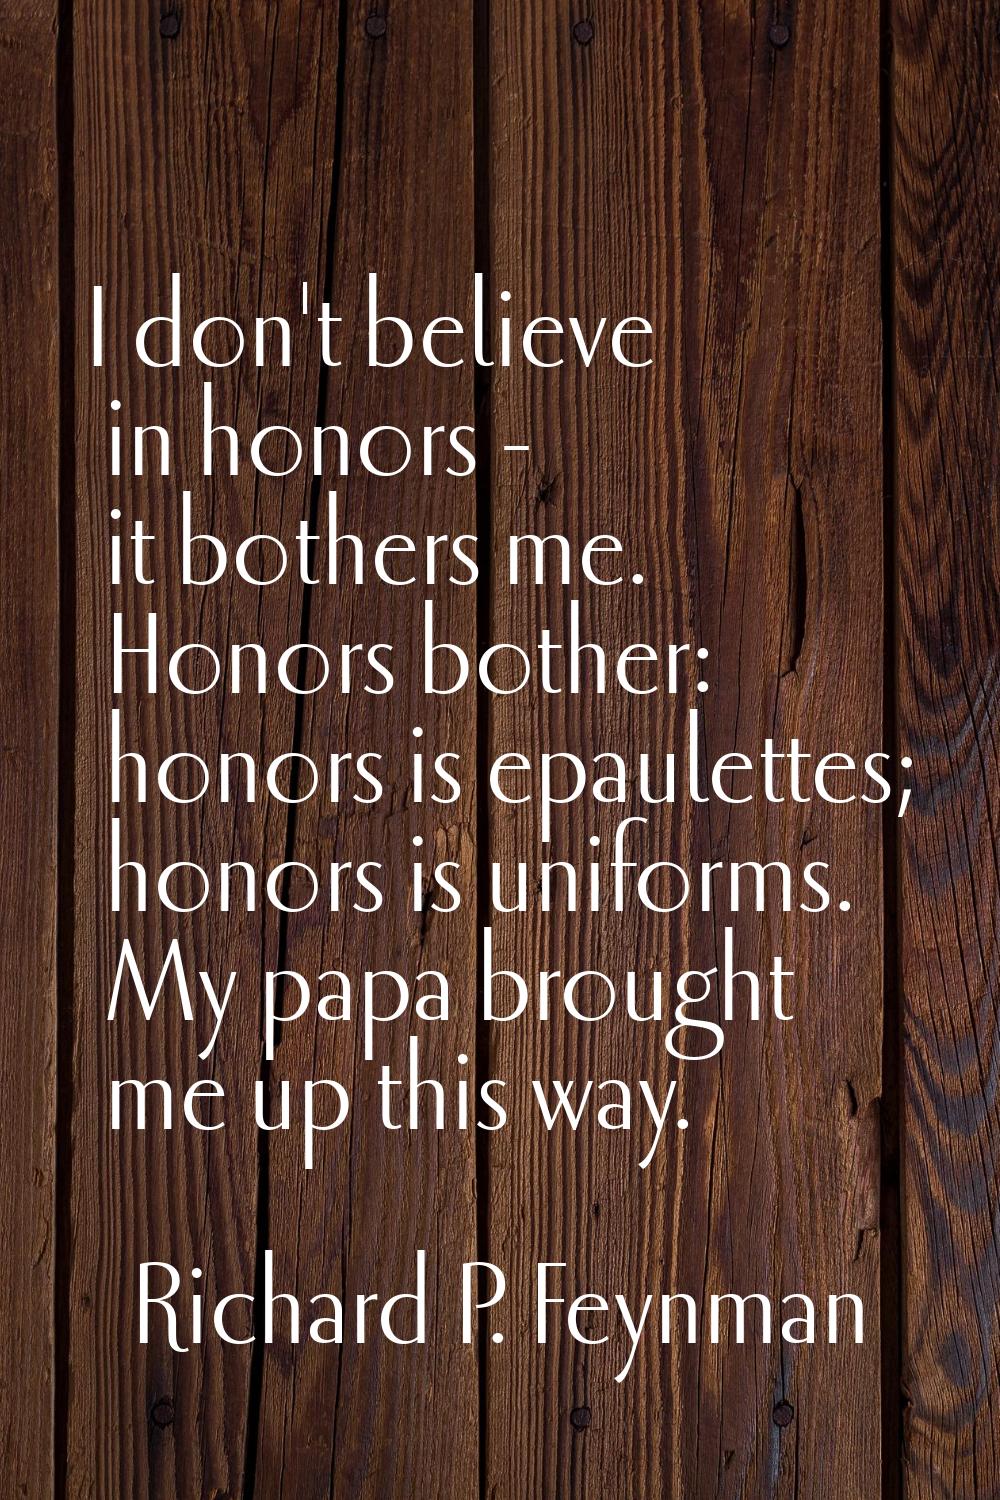 I don't believe in honors - it bothers me. Honors bother: honors is epaulettes; honors is uniforms.